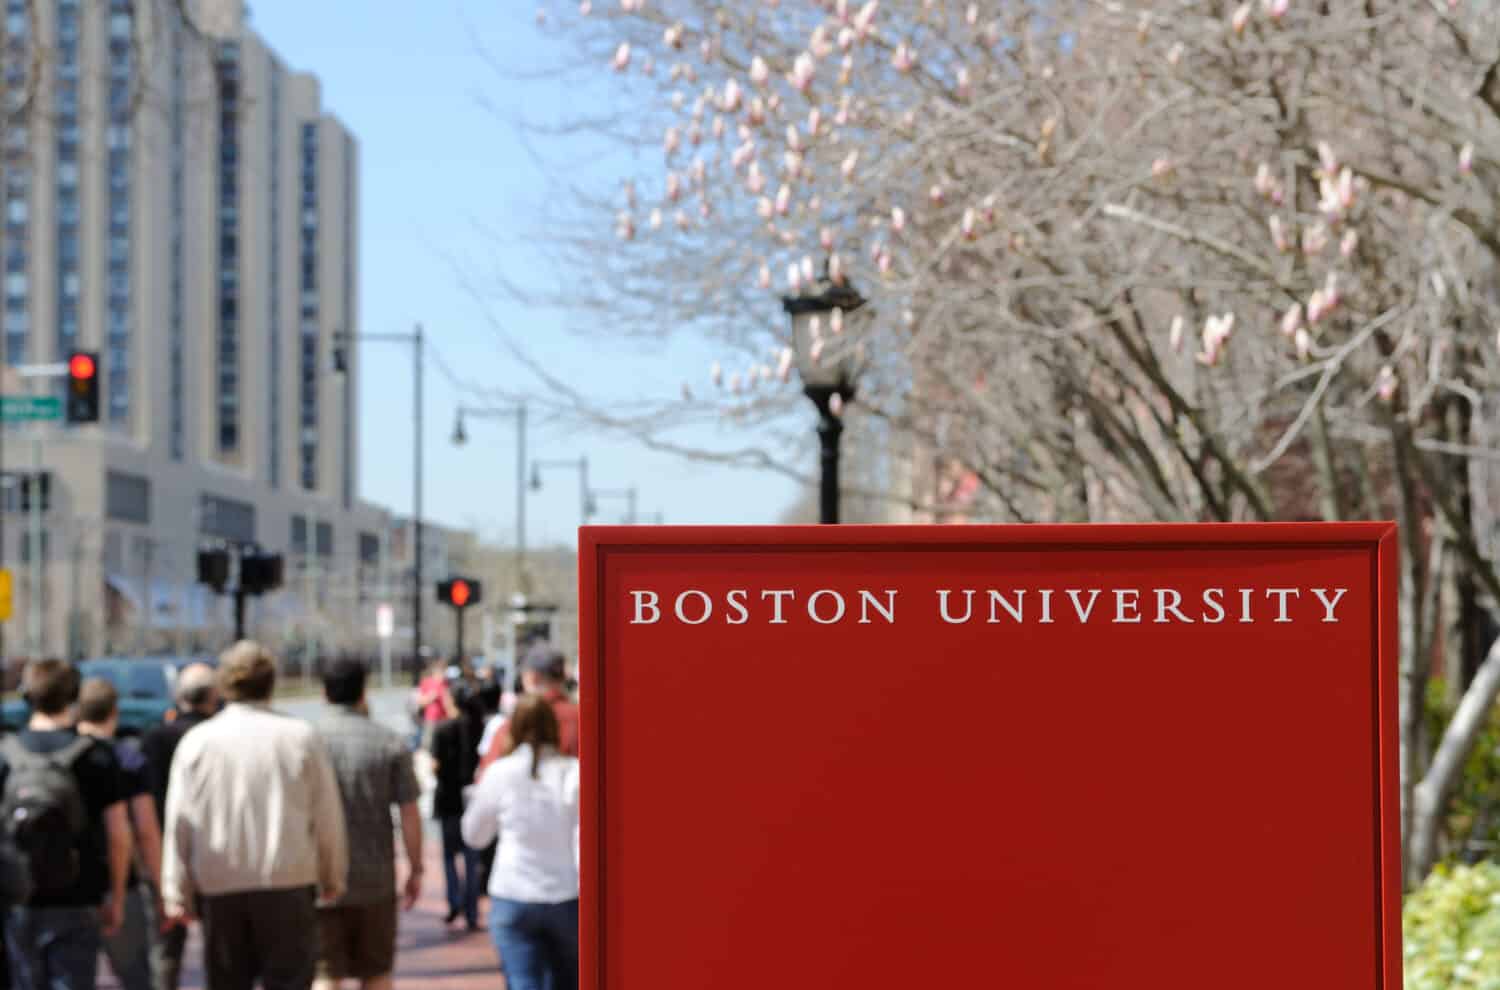 Boston University sign and crowd of students walking by in early spring